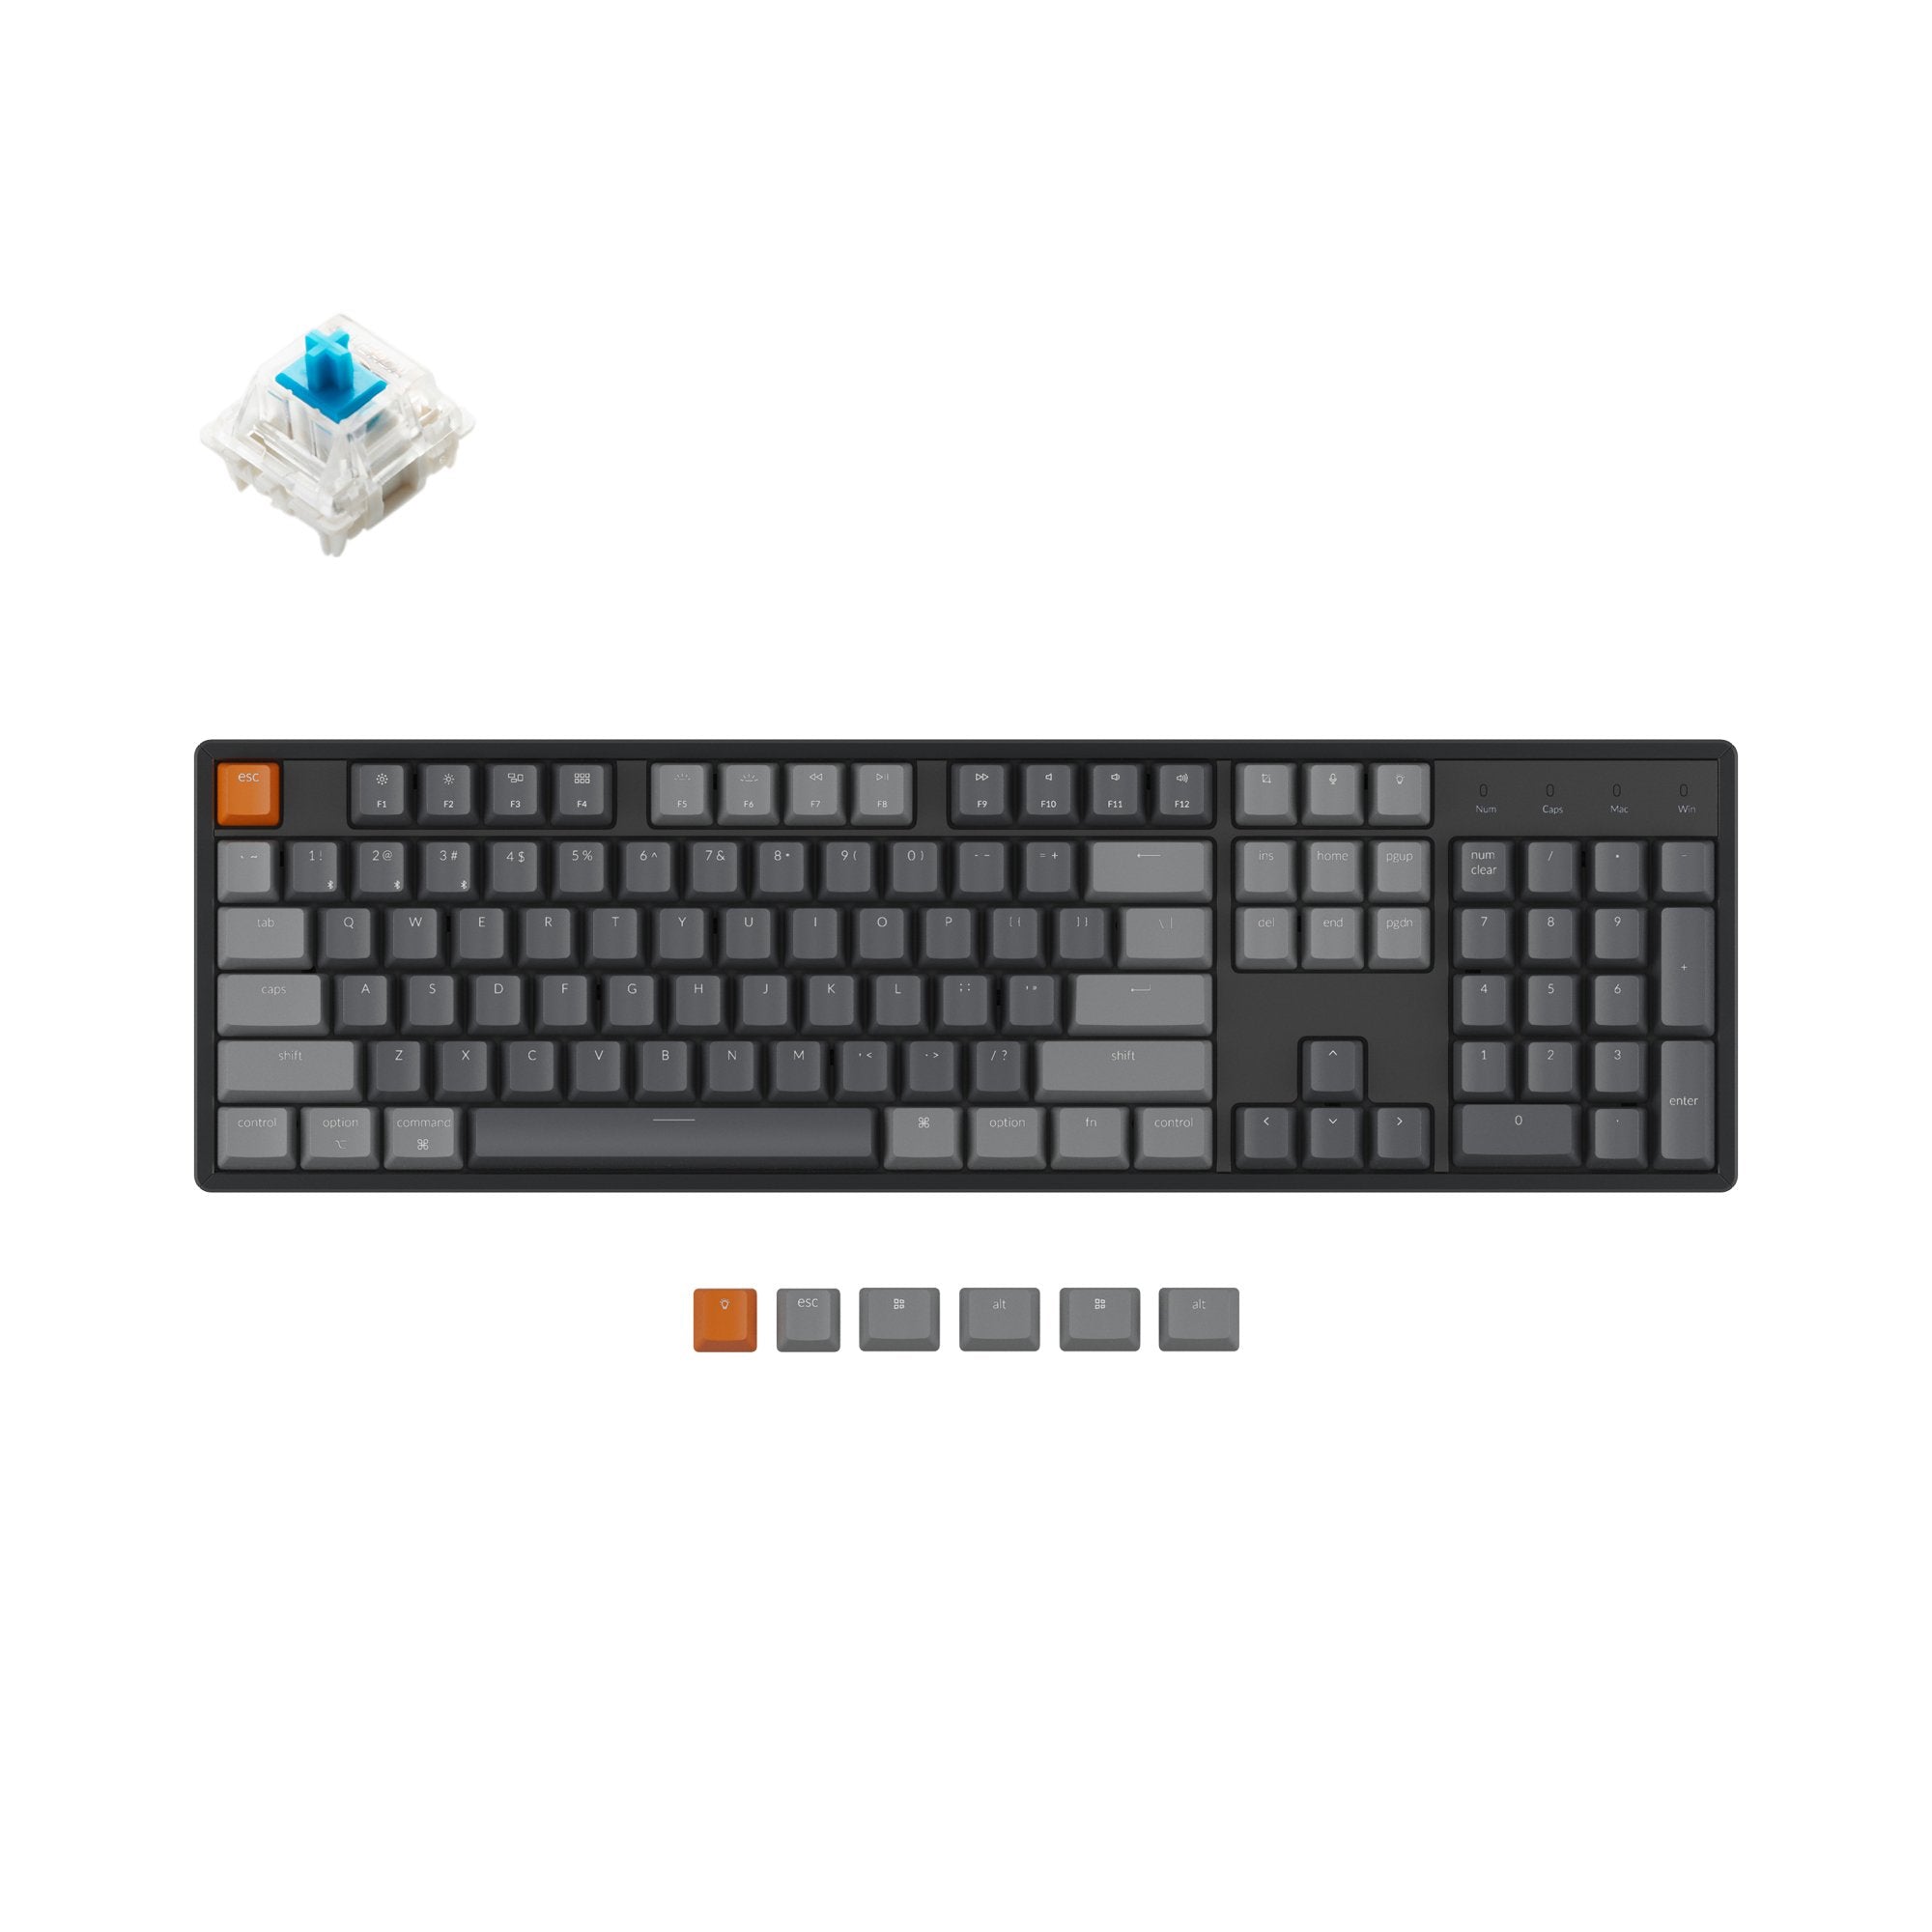 Keychron K10 Wireless mechanical keyboard has included keycaps for both Windows and macOS, and users can hotswap every switch in seconds with the hot-swappable version.